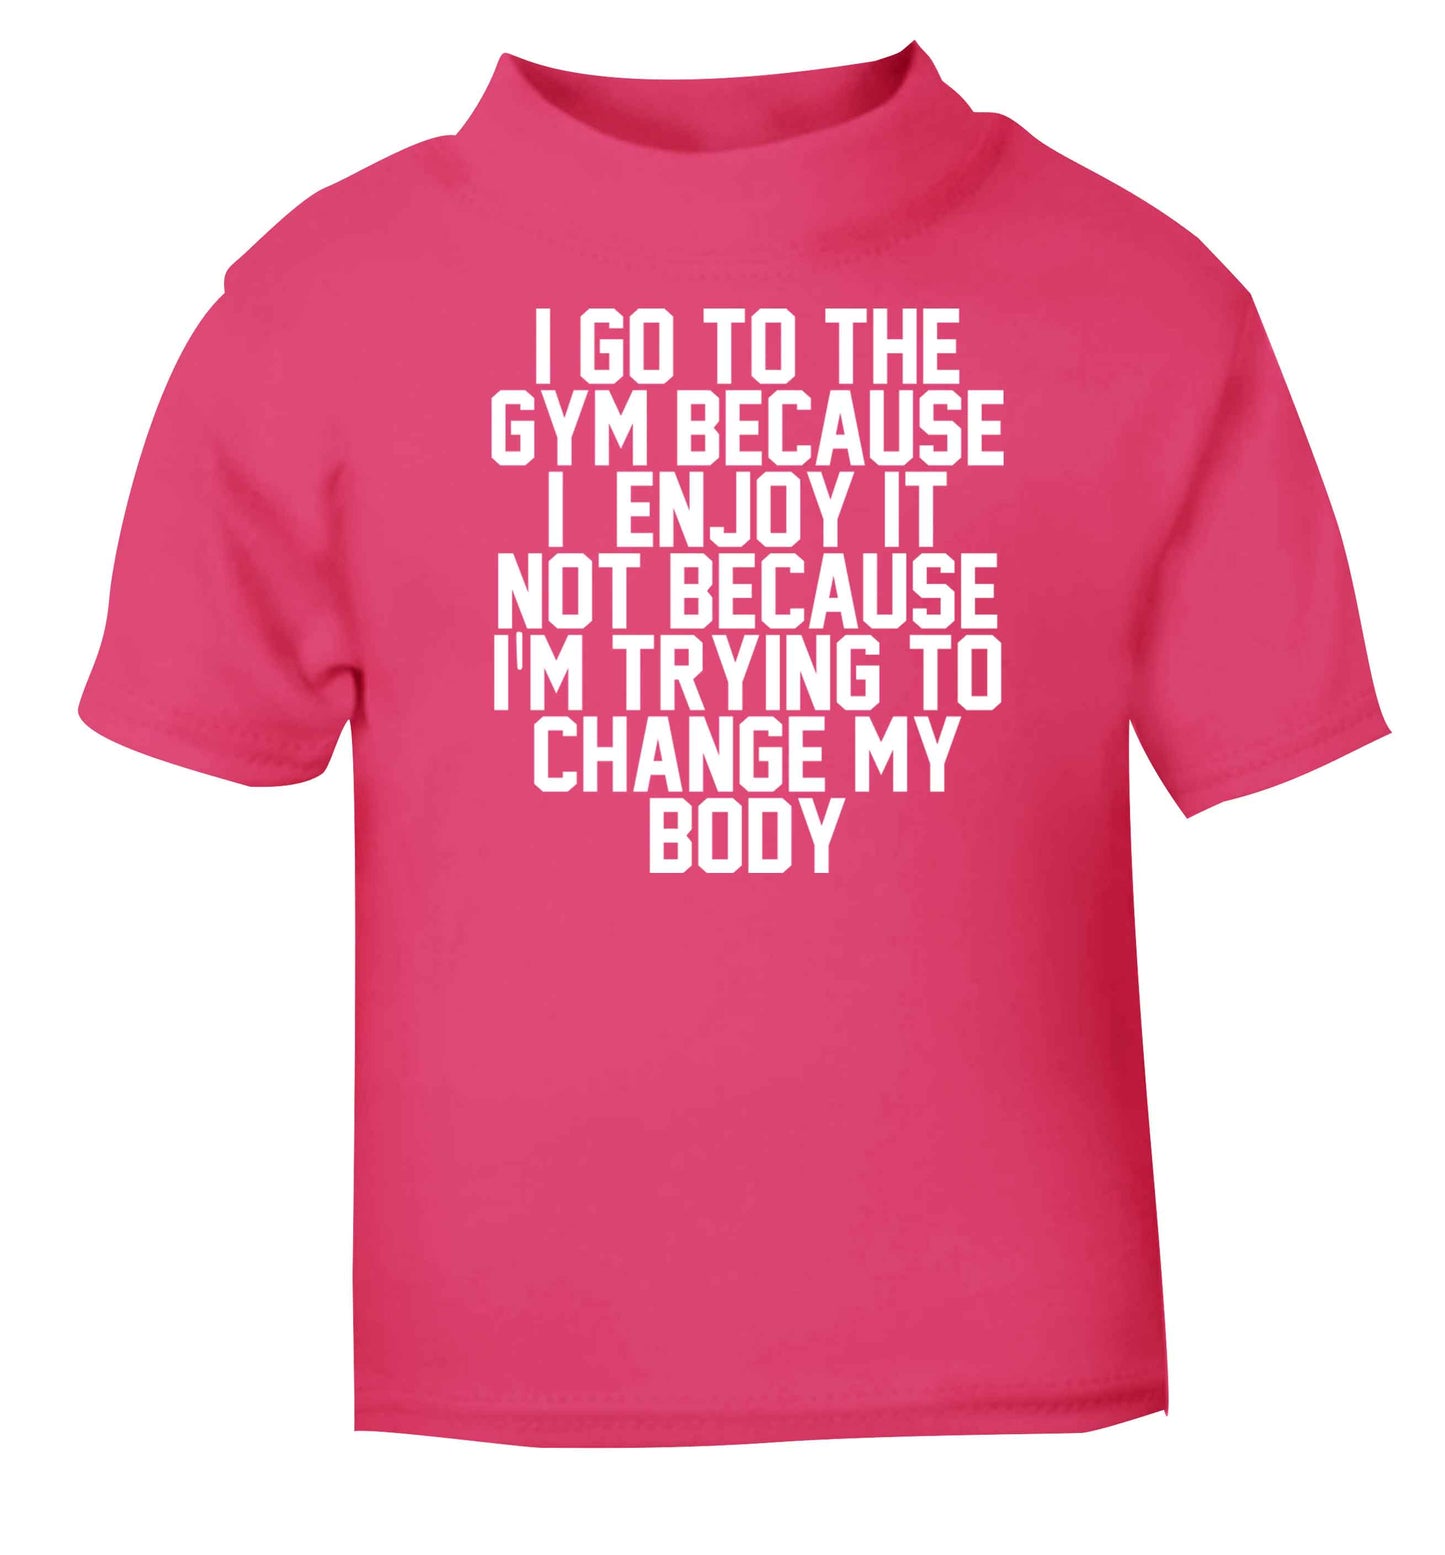 I go to the gym because I enjoy it not because I'm trying to change my body pink baby toddler Tshirt 2 Years